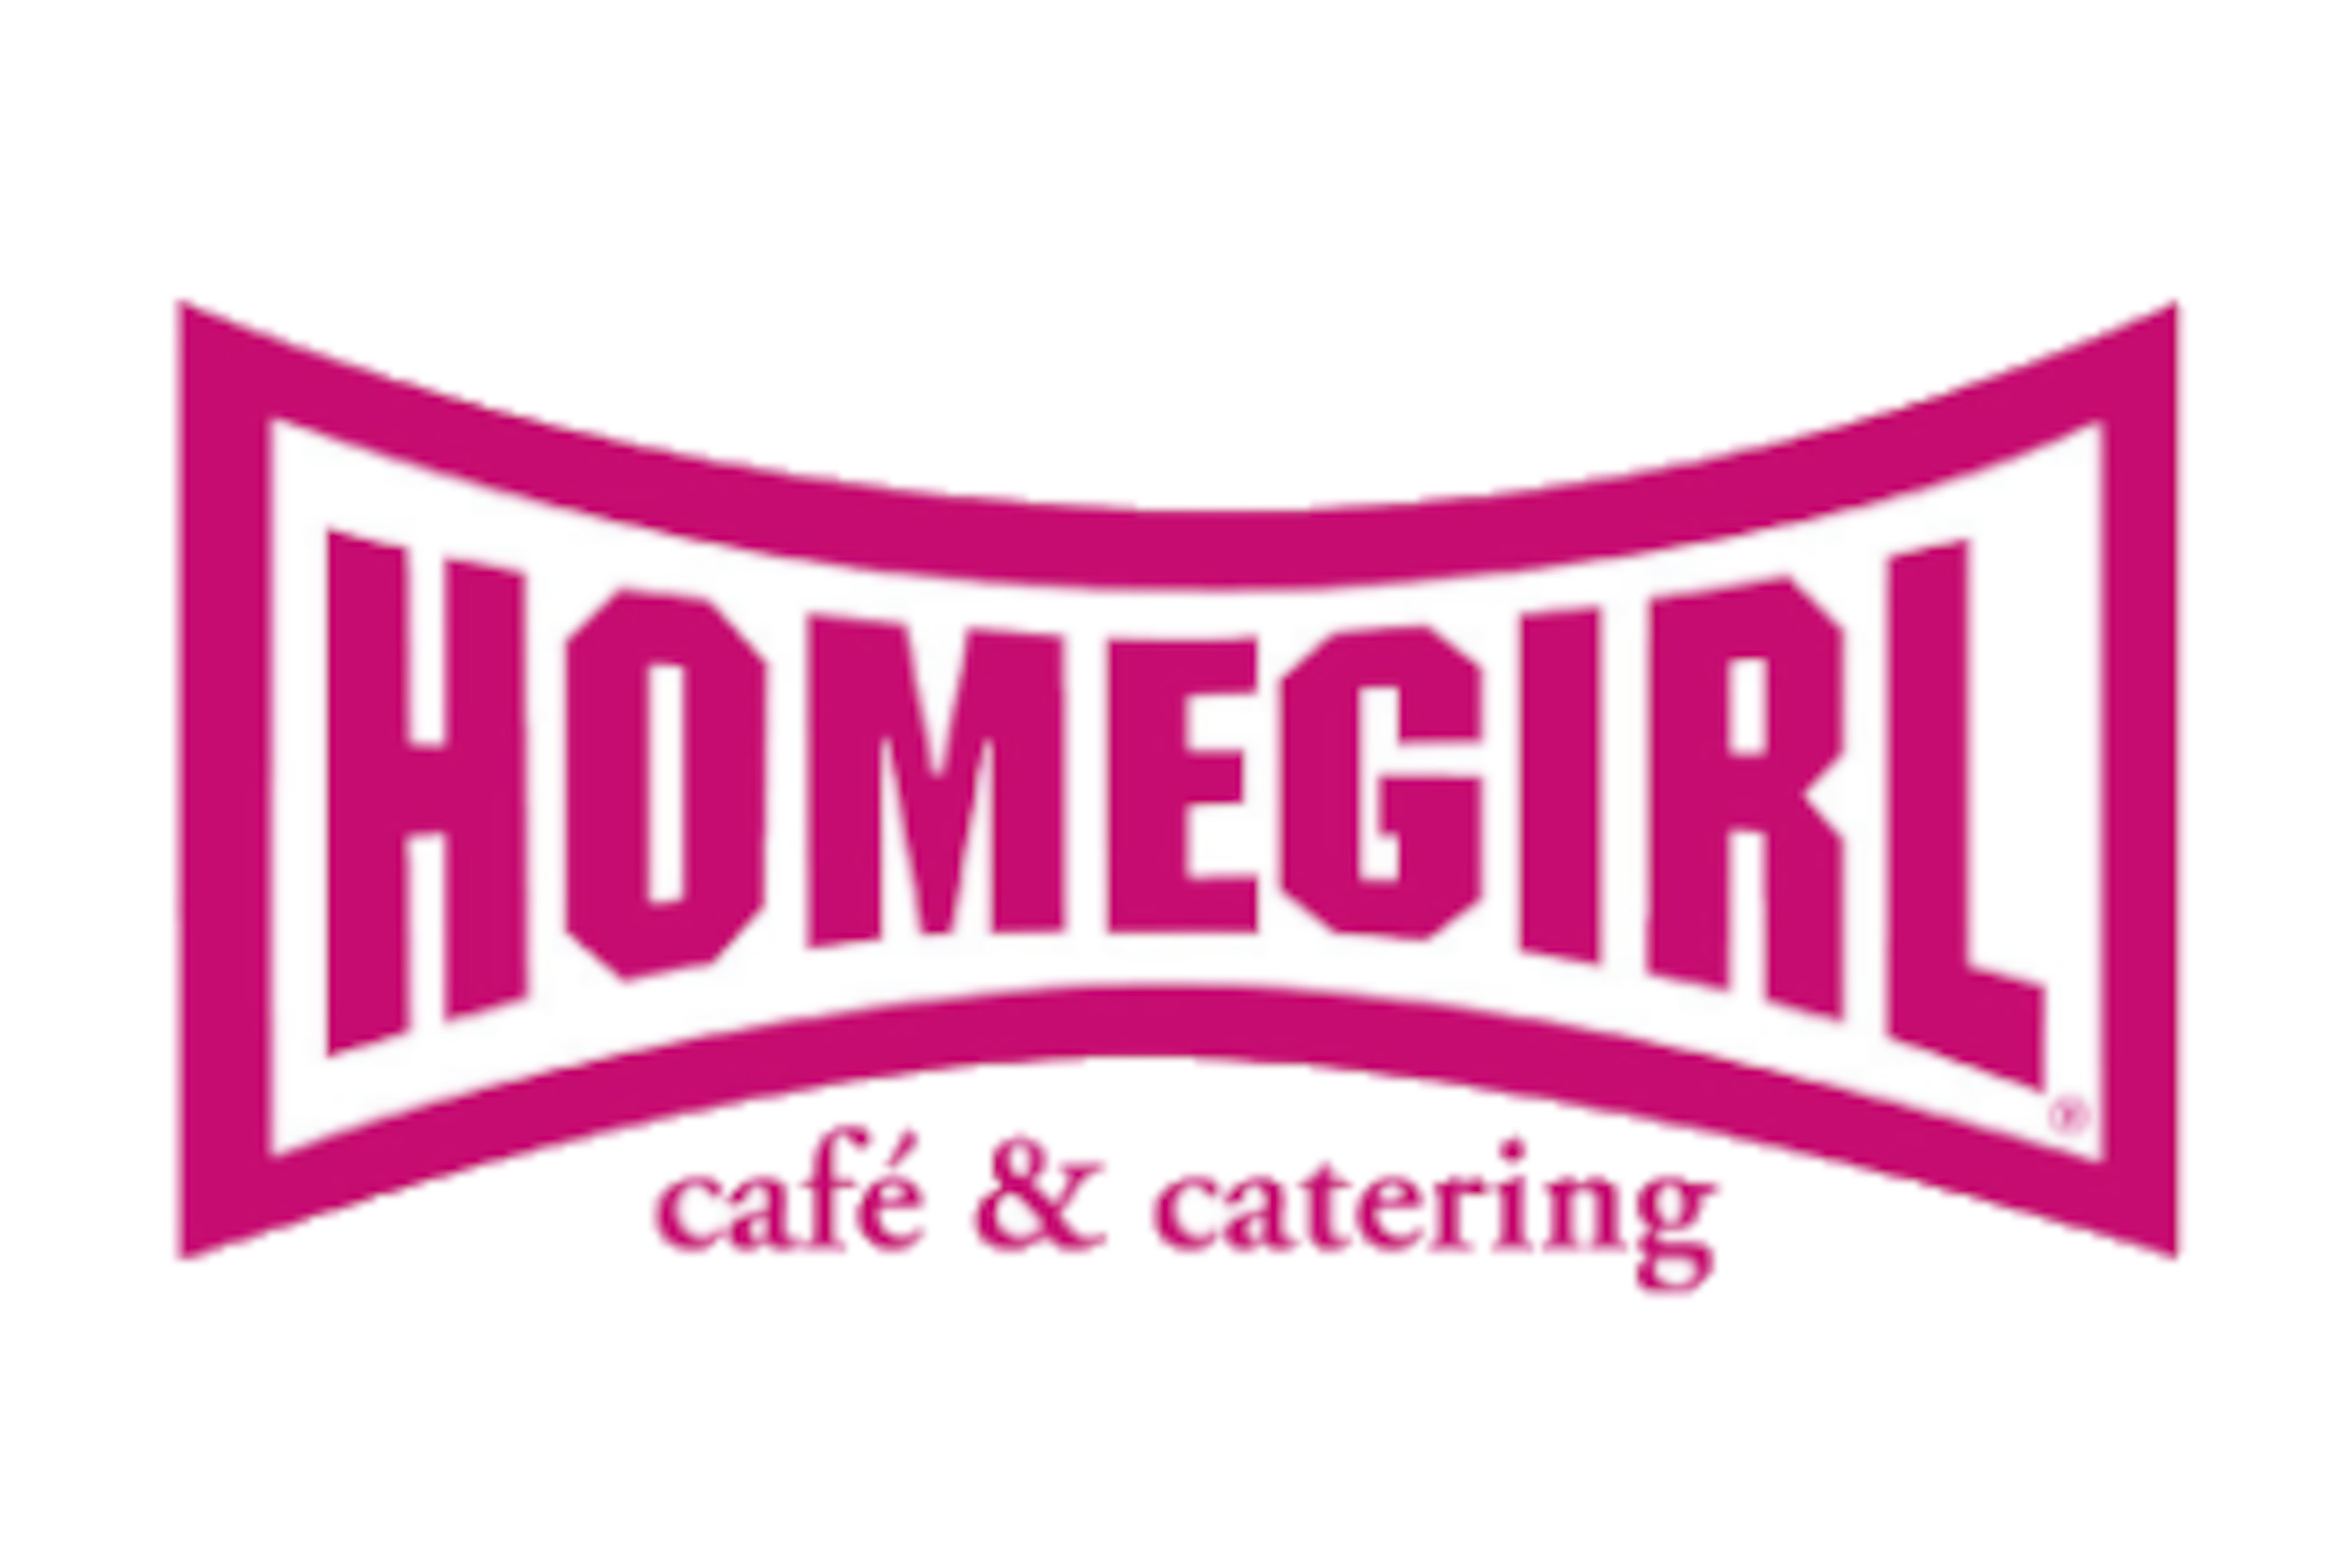 Text reads Homegirl in pink block text with stylized outline above cafe and catering in smaller pink text